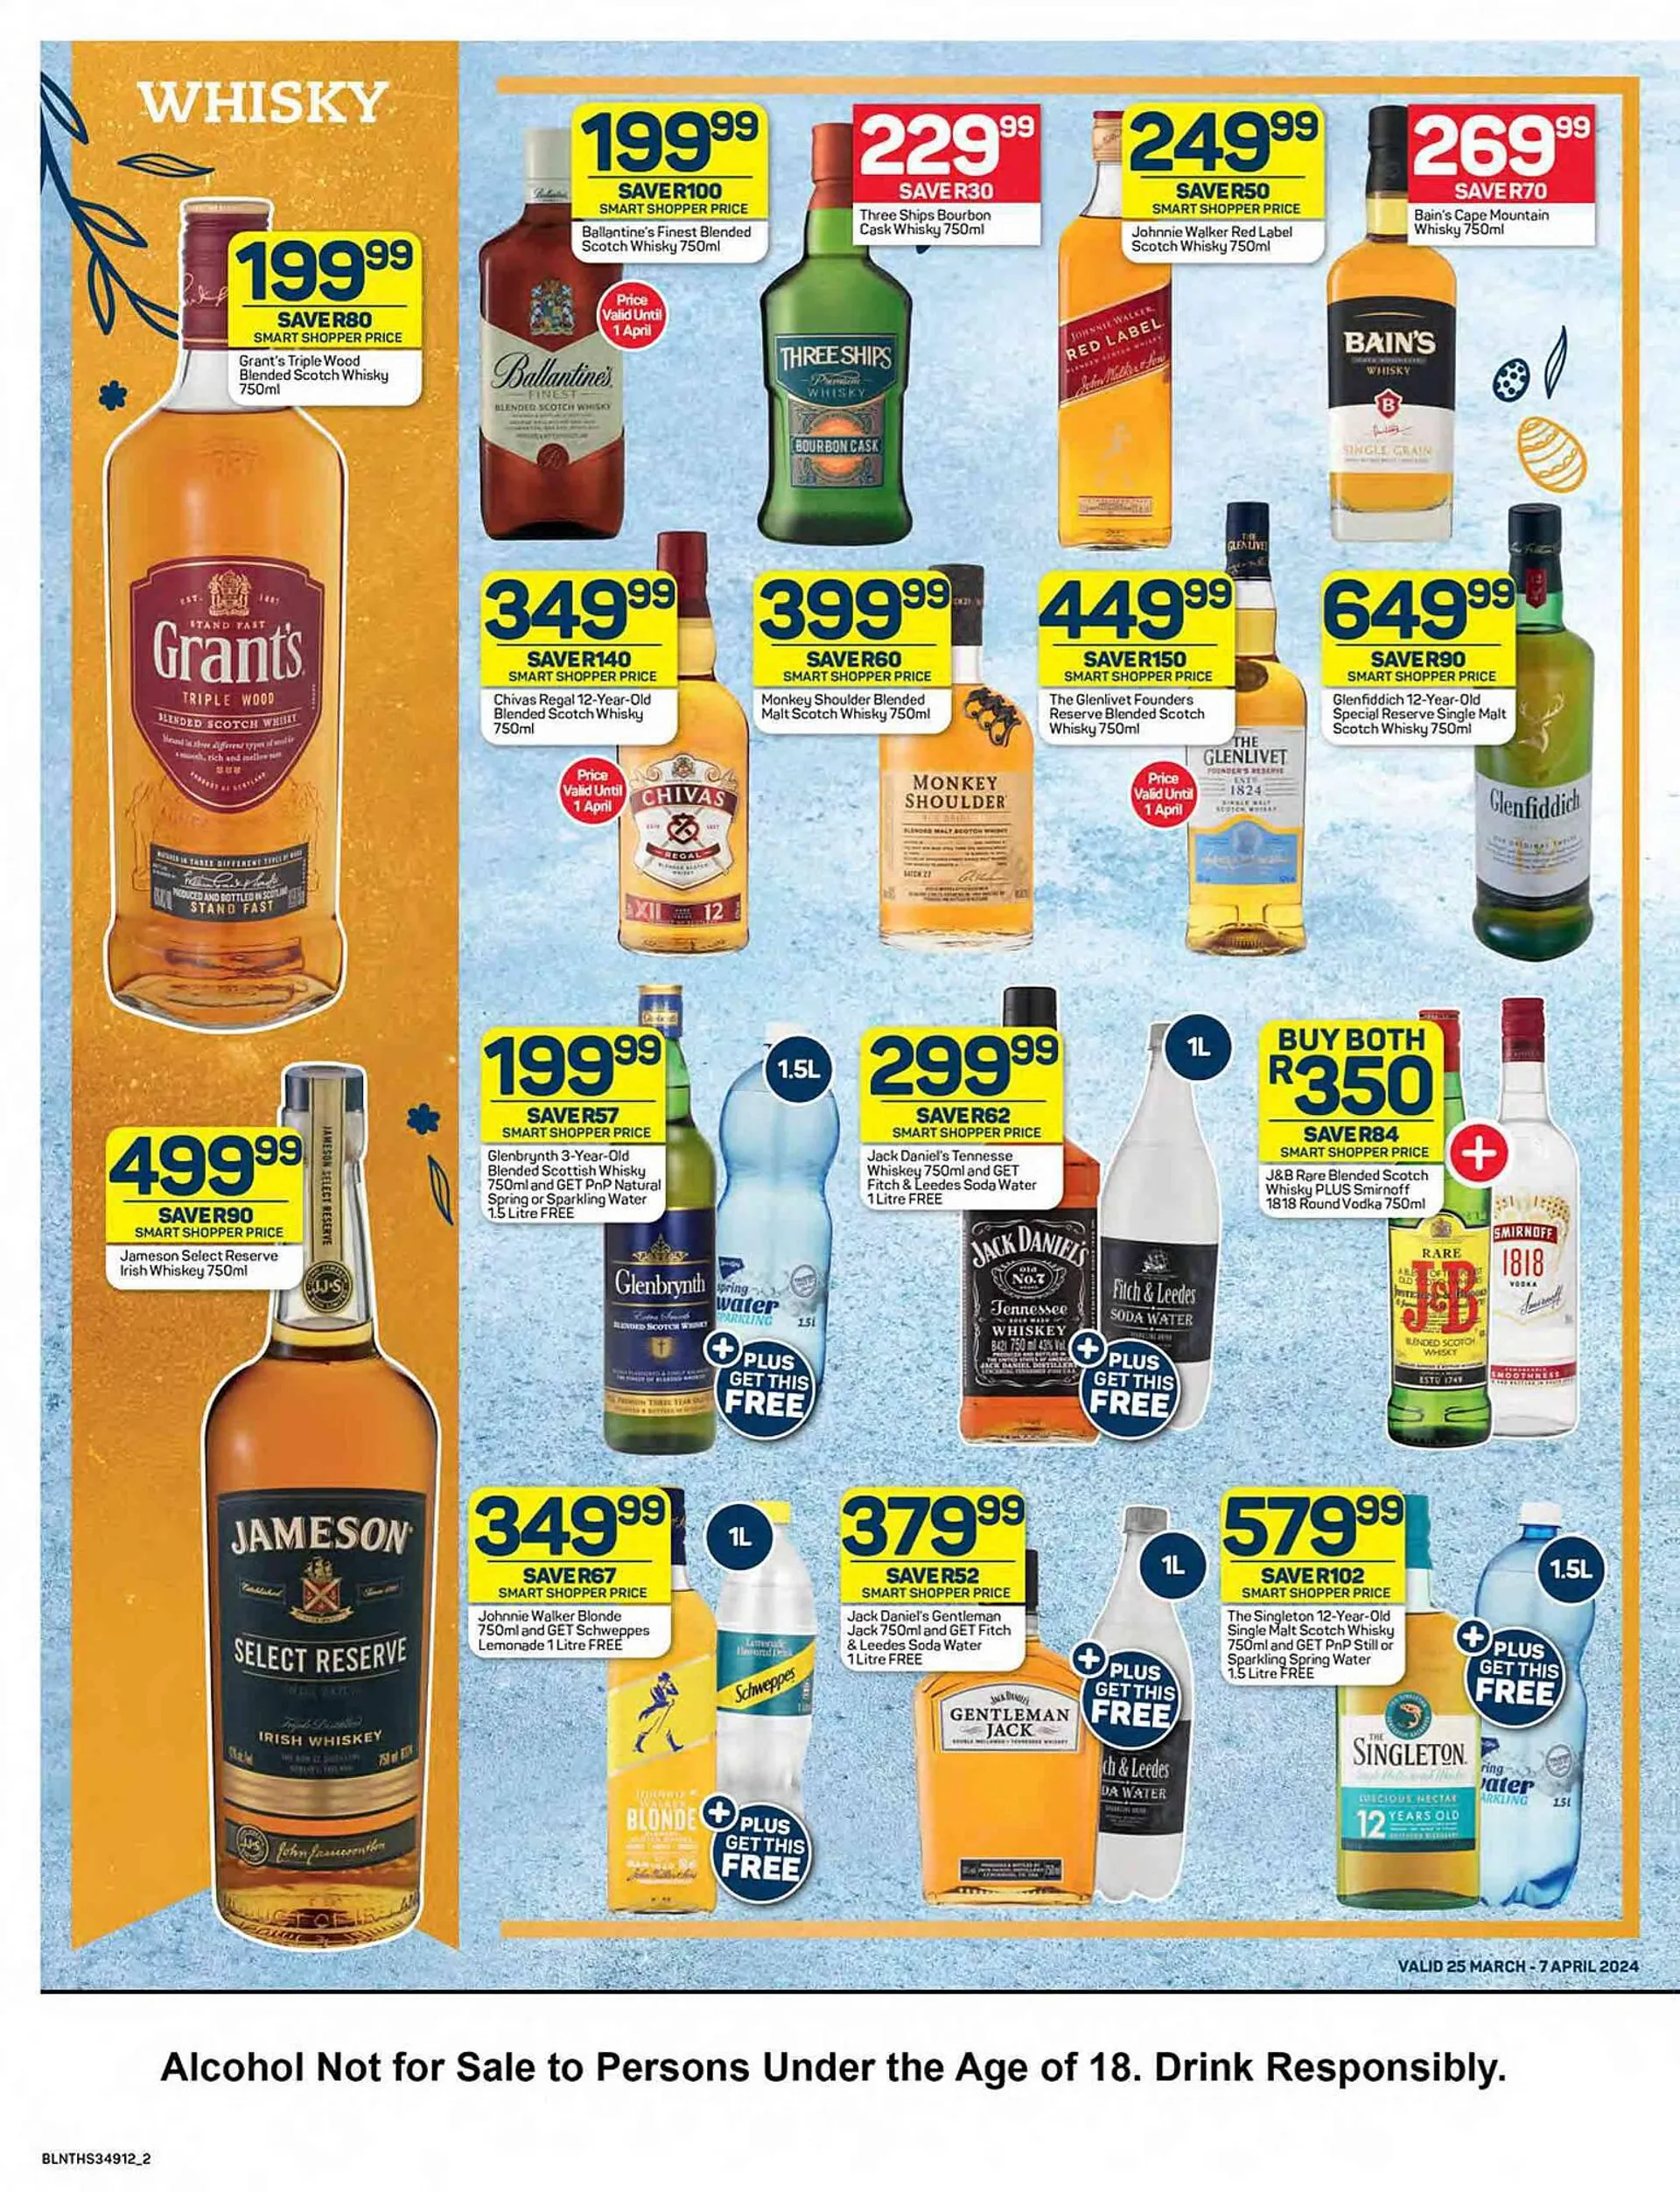 Pick n Pay catalogue - 25 March 7 April 2024 - Page 2